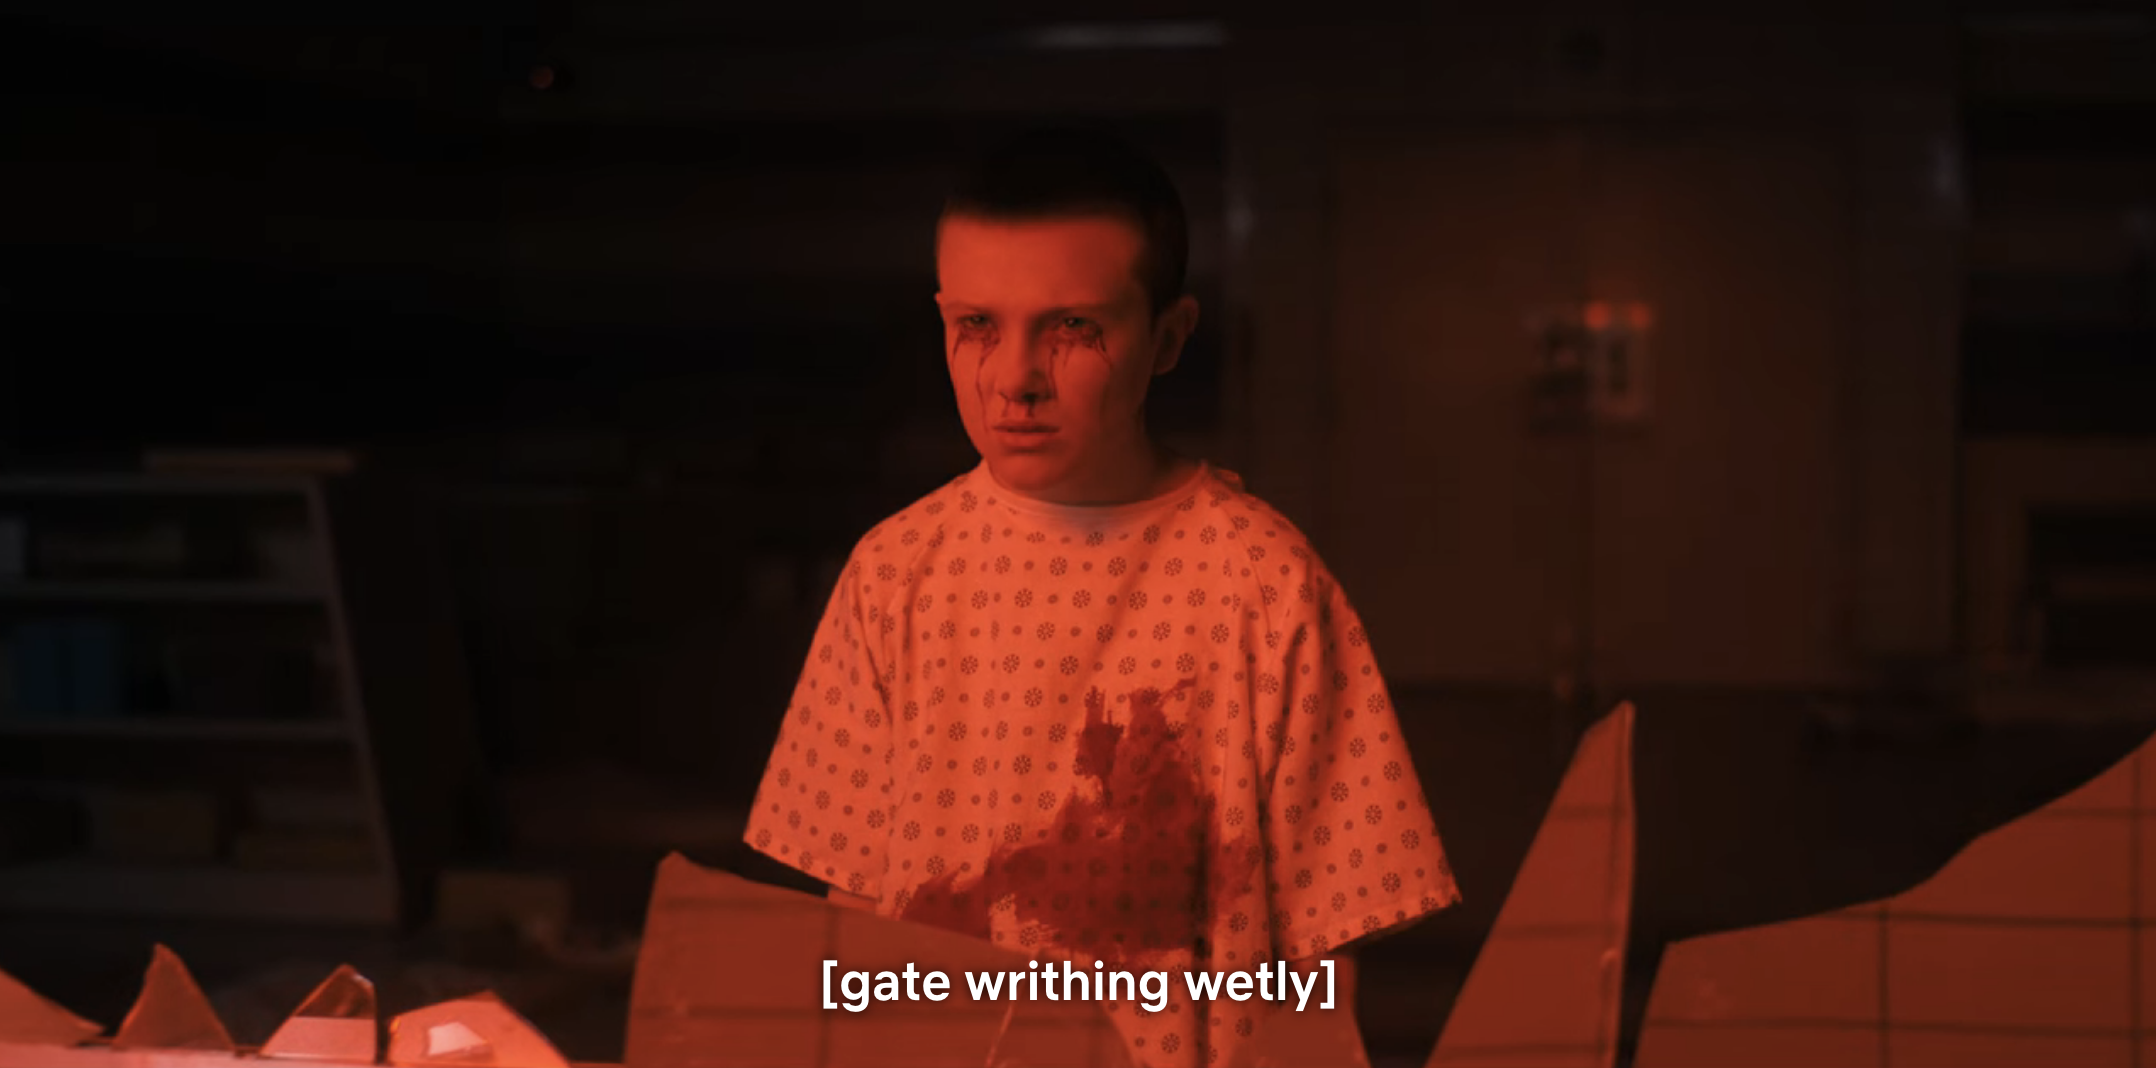 eleven standing in a hospital gown